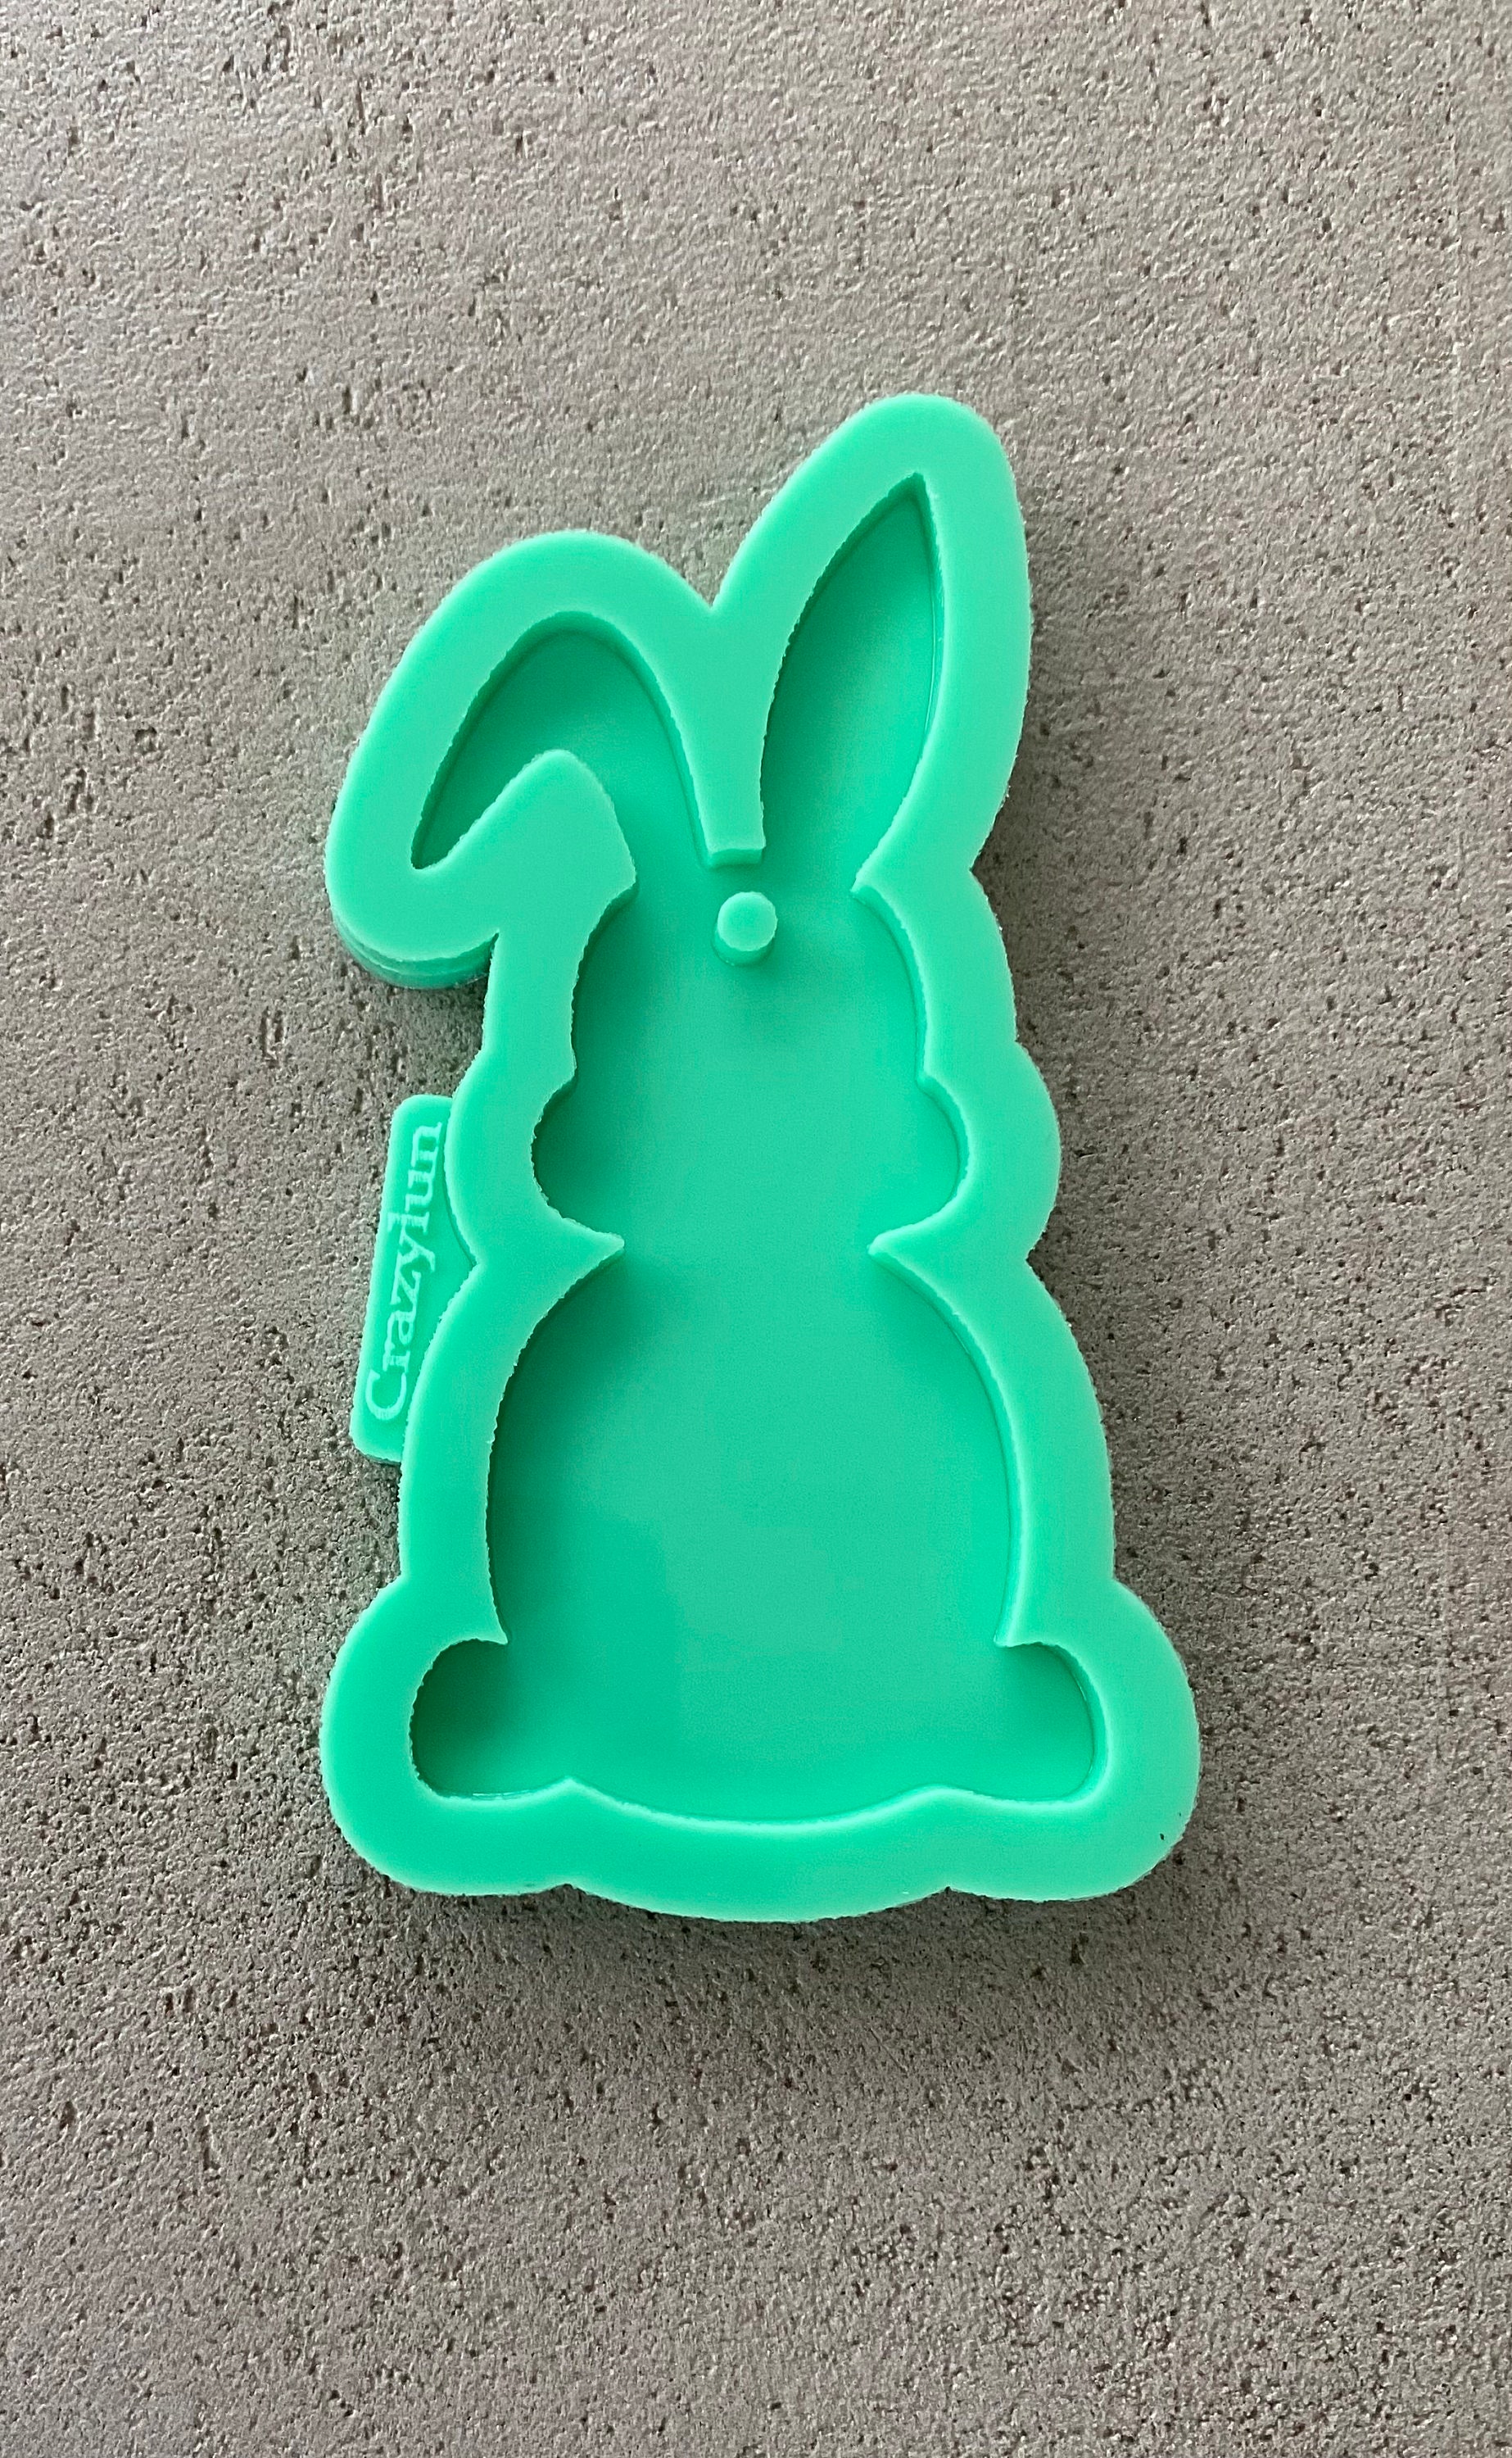 Silicone Mold Rabbit Type 2 Resin, Casting Mold, Epoxy Resin Mold Easter  Epoxy 